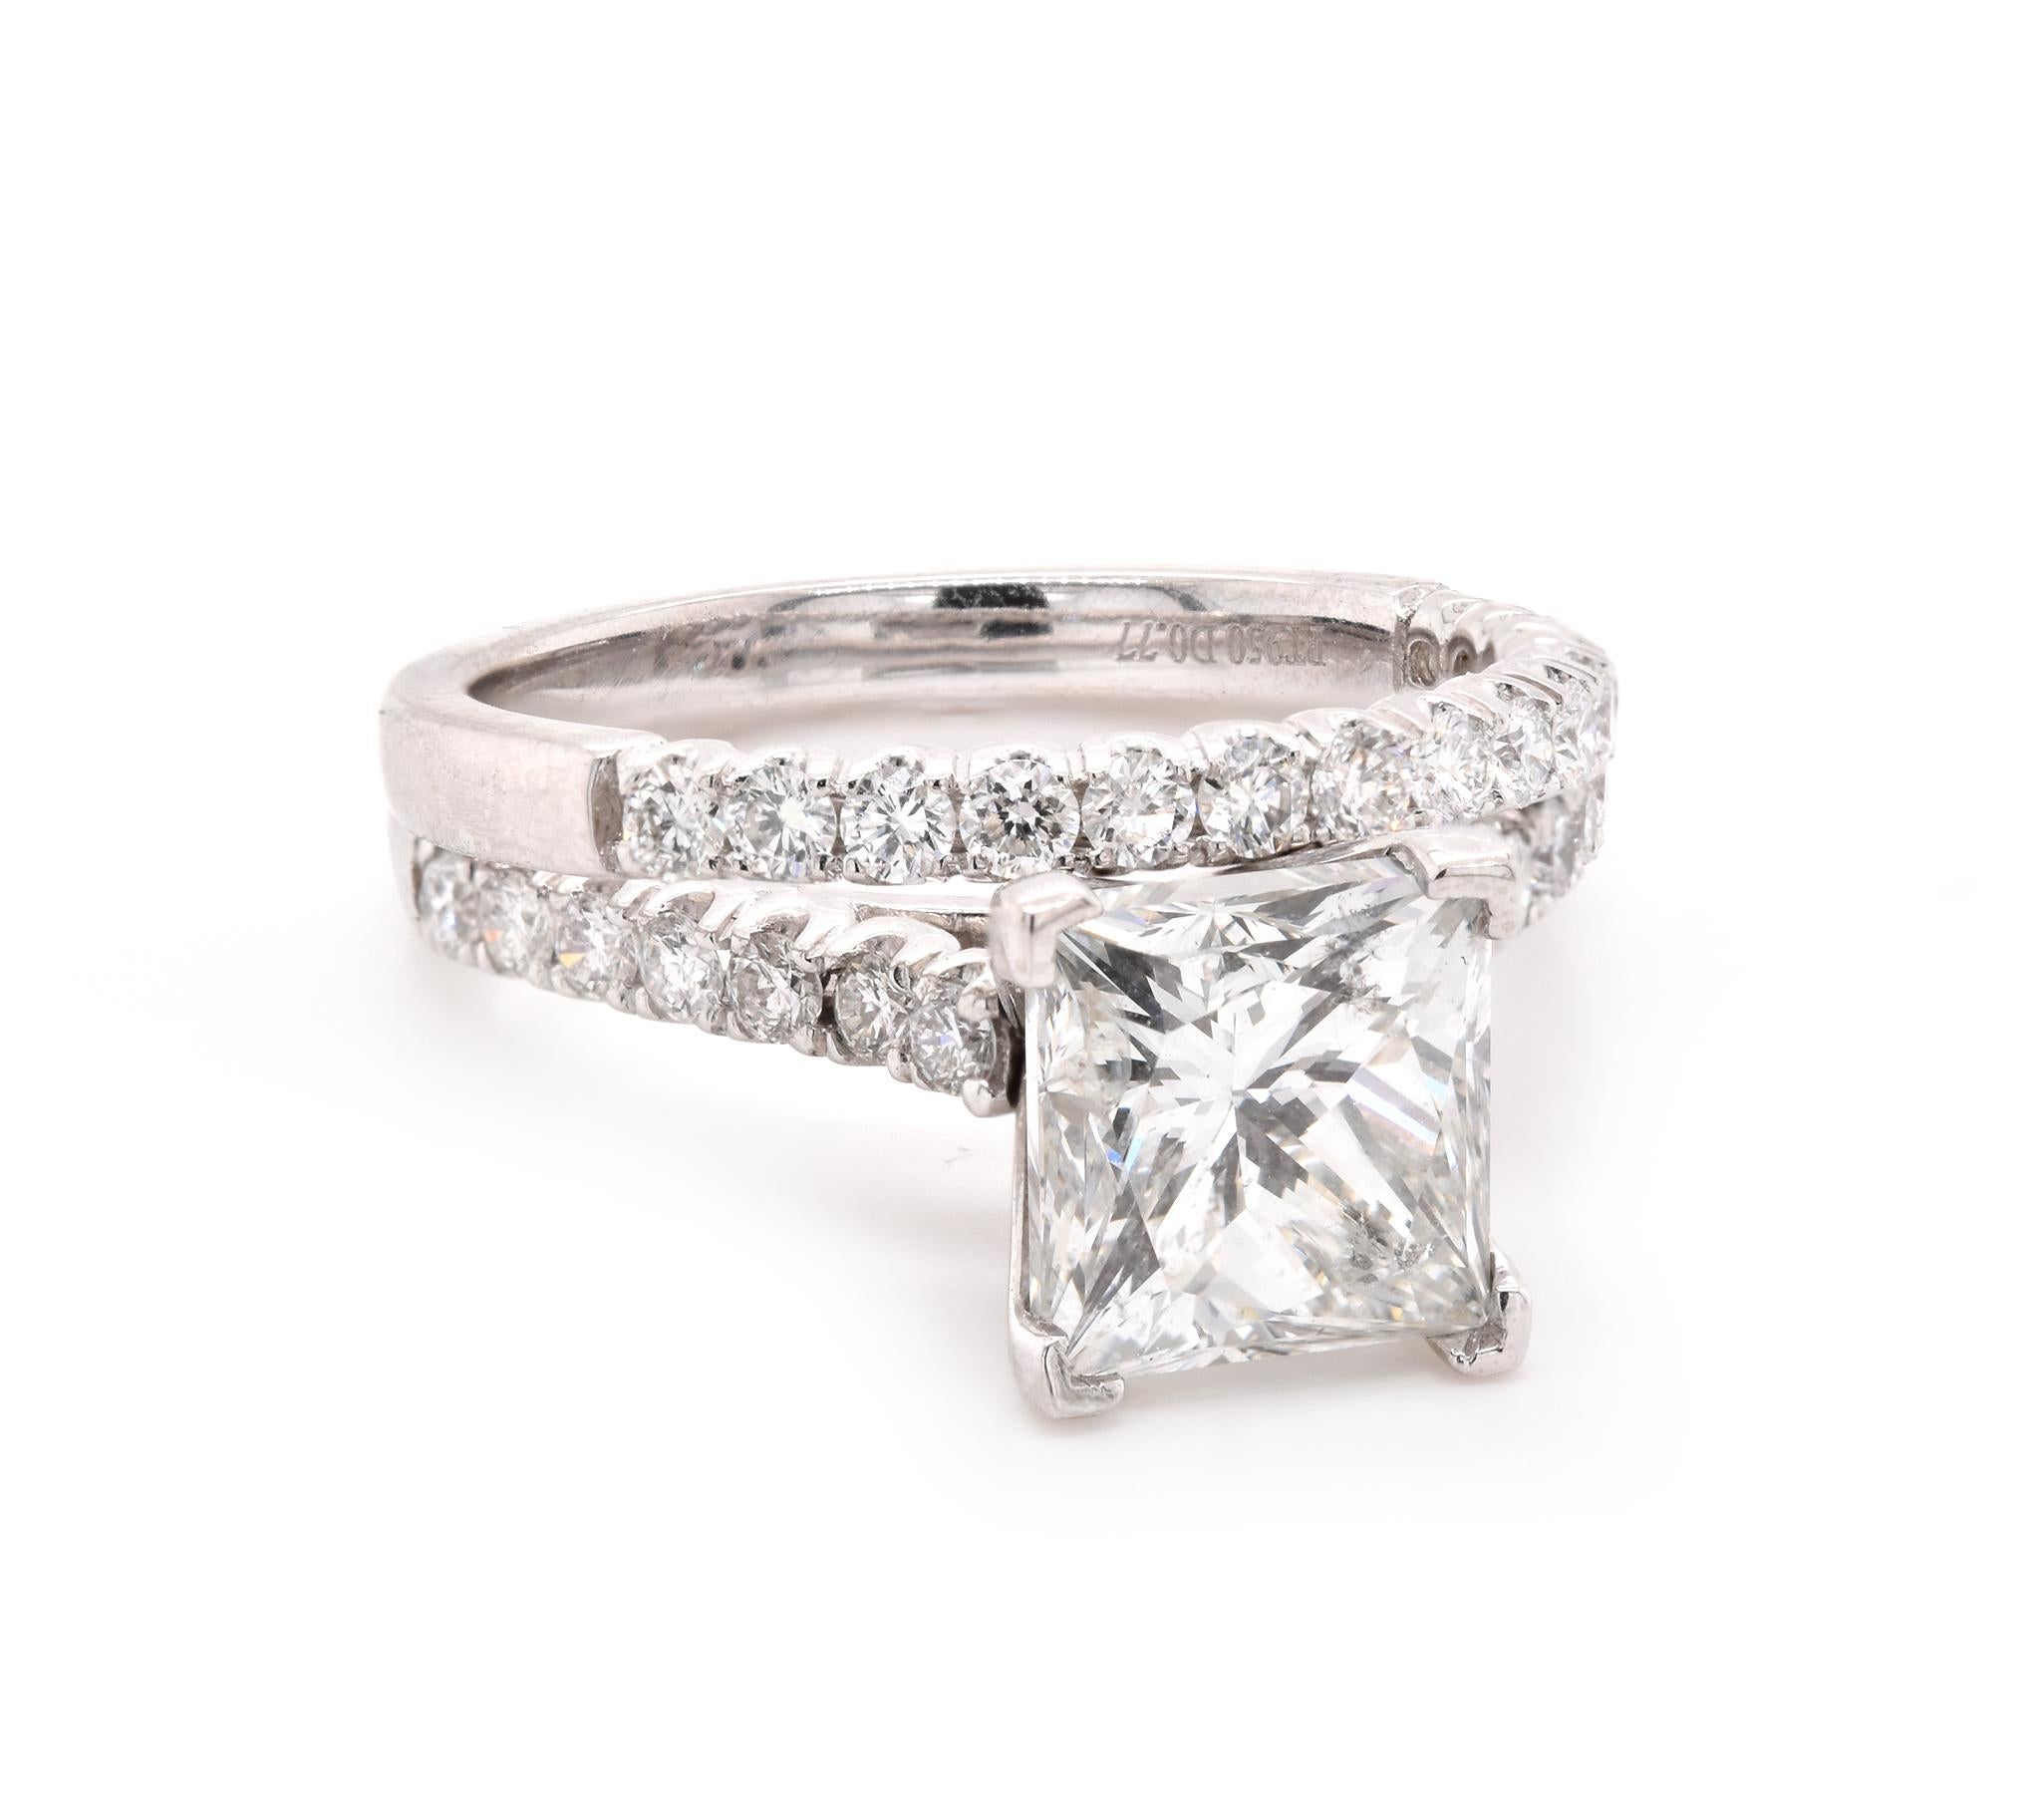 Material: platinum
Diamond: 3.04ct princess cut
Color: J
Clarity: SI1
Diamond: 29 round brillinat cut = .77cttw
Color: G
Clarity: VS
Ring Size: 7 (please allow up to 2 additional business days for sizing requests)
Dimensions: set measures 4.5mm